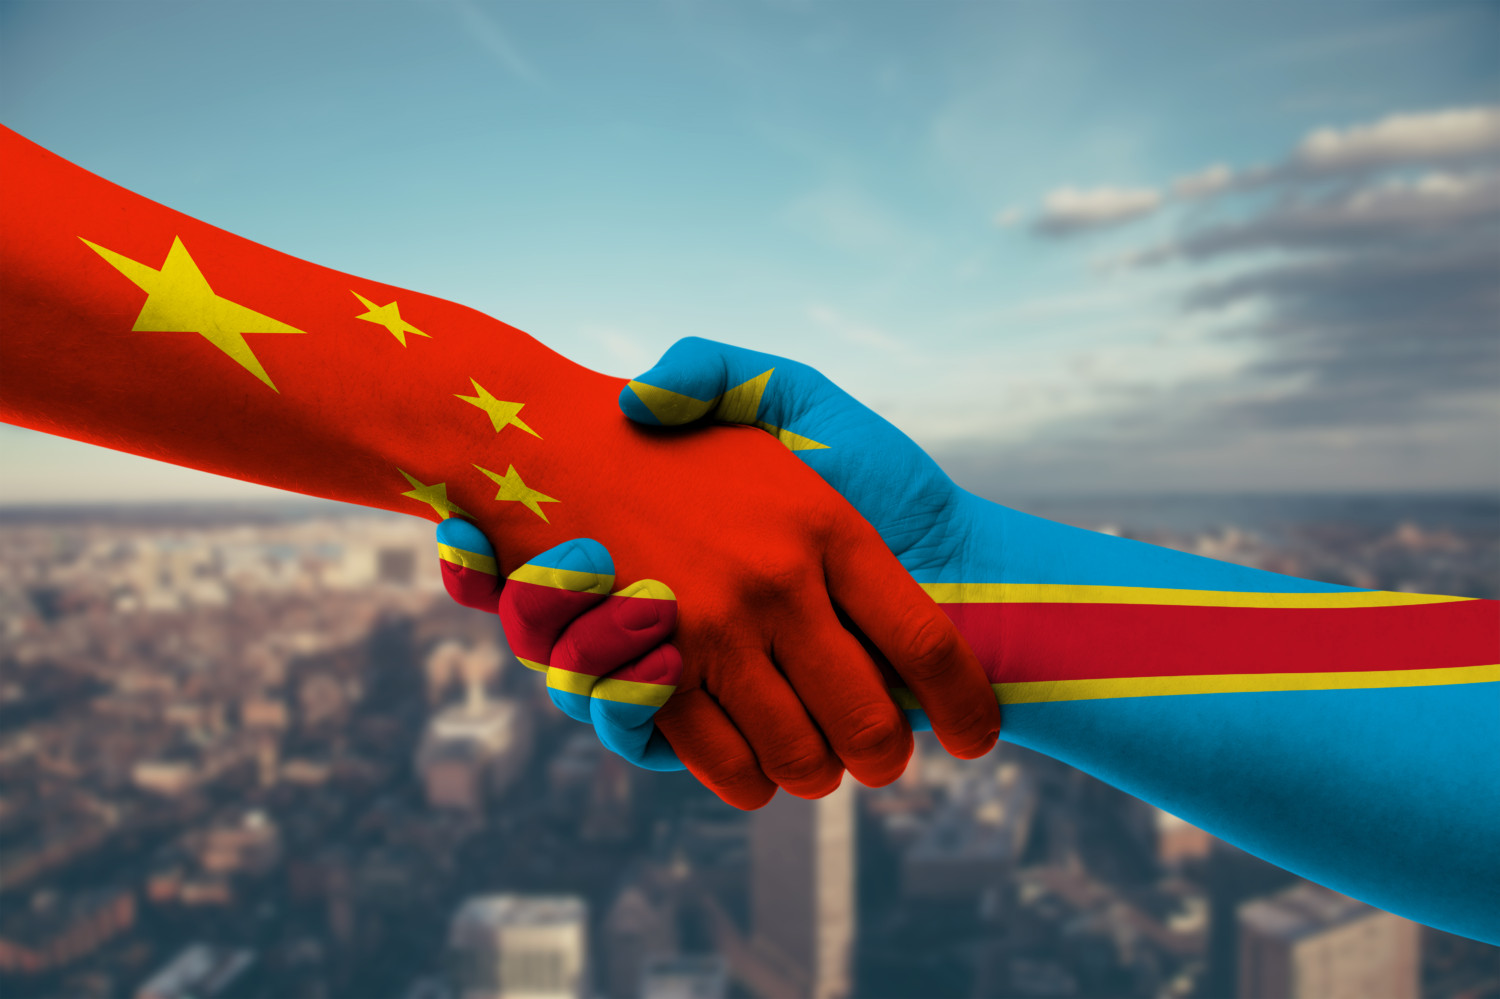 Cobalt, Copper: China strengthens relations with DRC through debt relief and Belt and Road Initiative